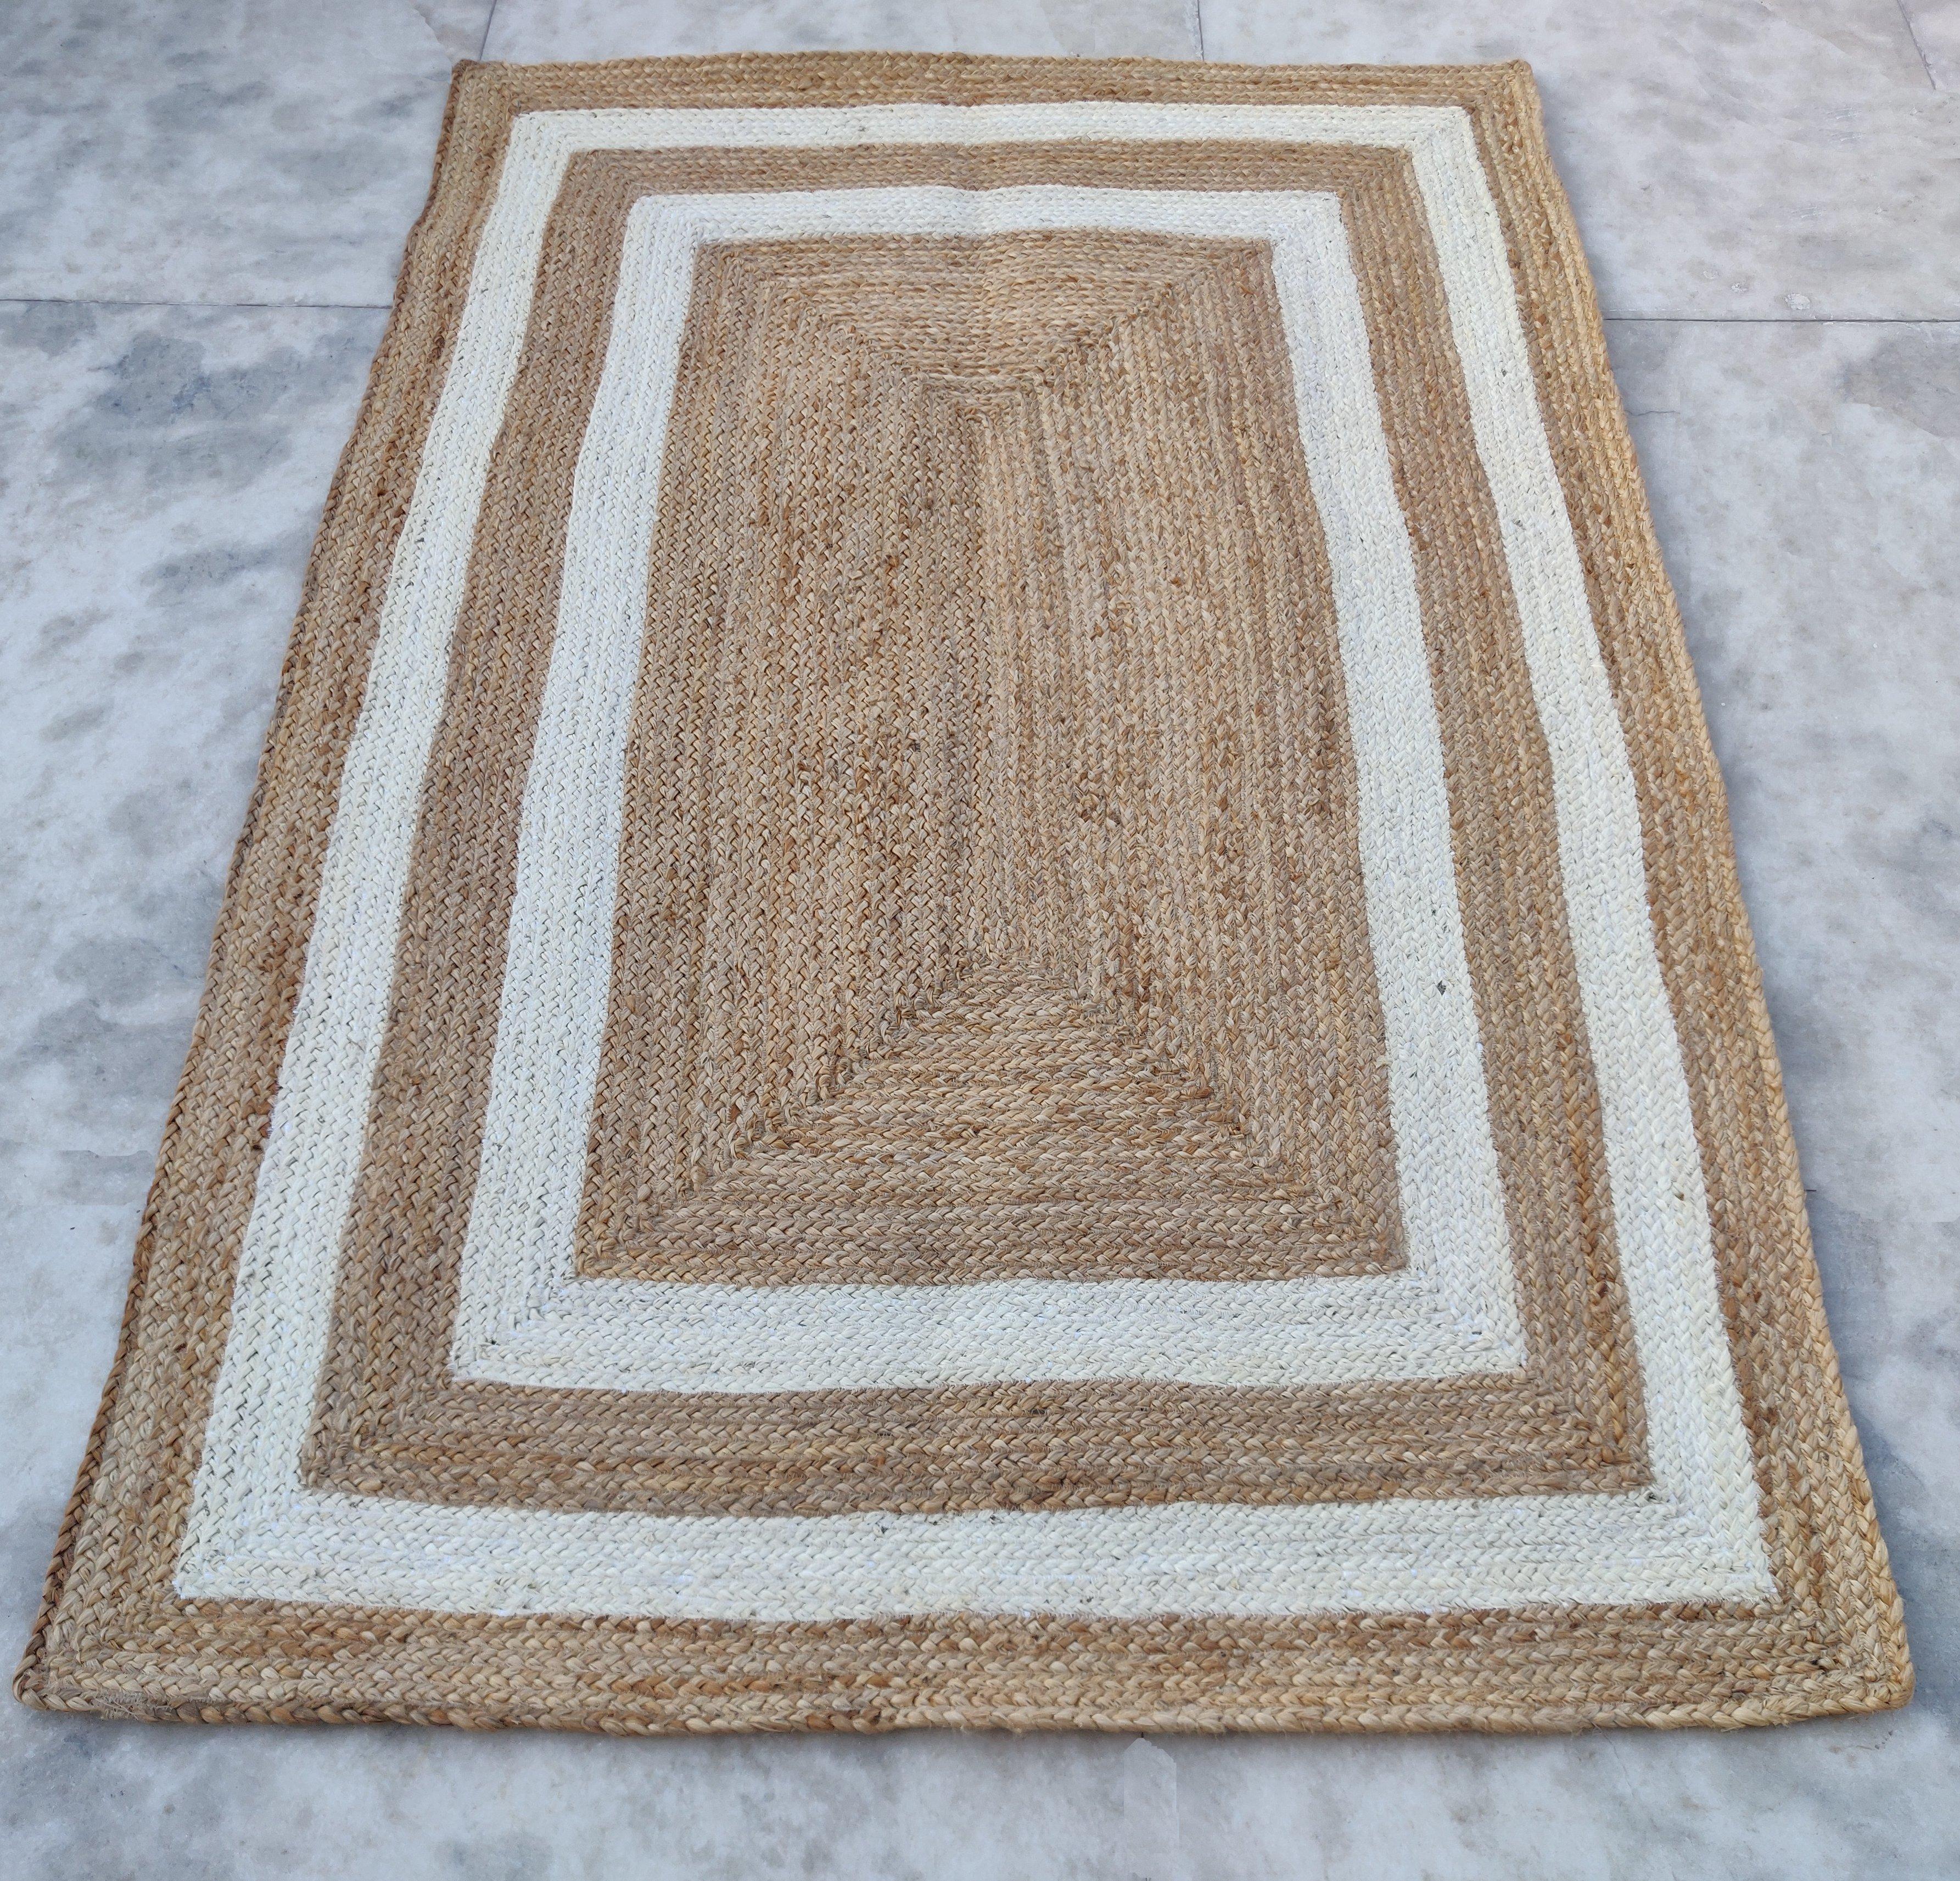 Hand-Woven Handmade Jute Area Flat Weave Rug, 4x6 Jute And White Bordered Indian Dhurrie For Sale